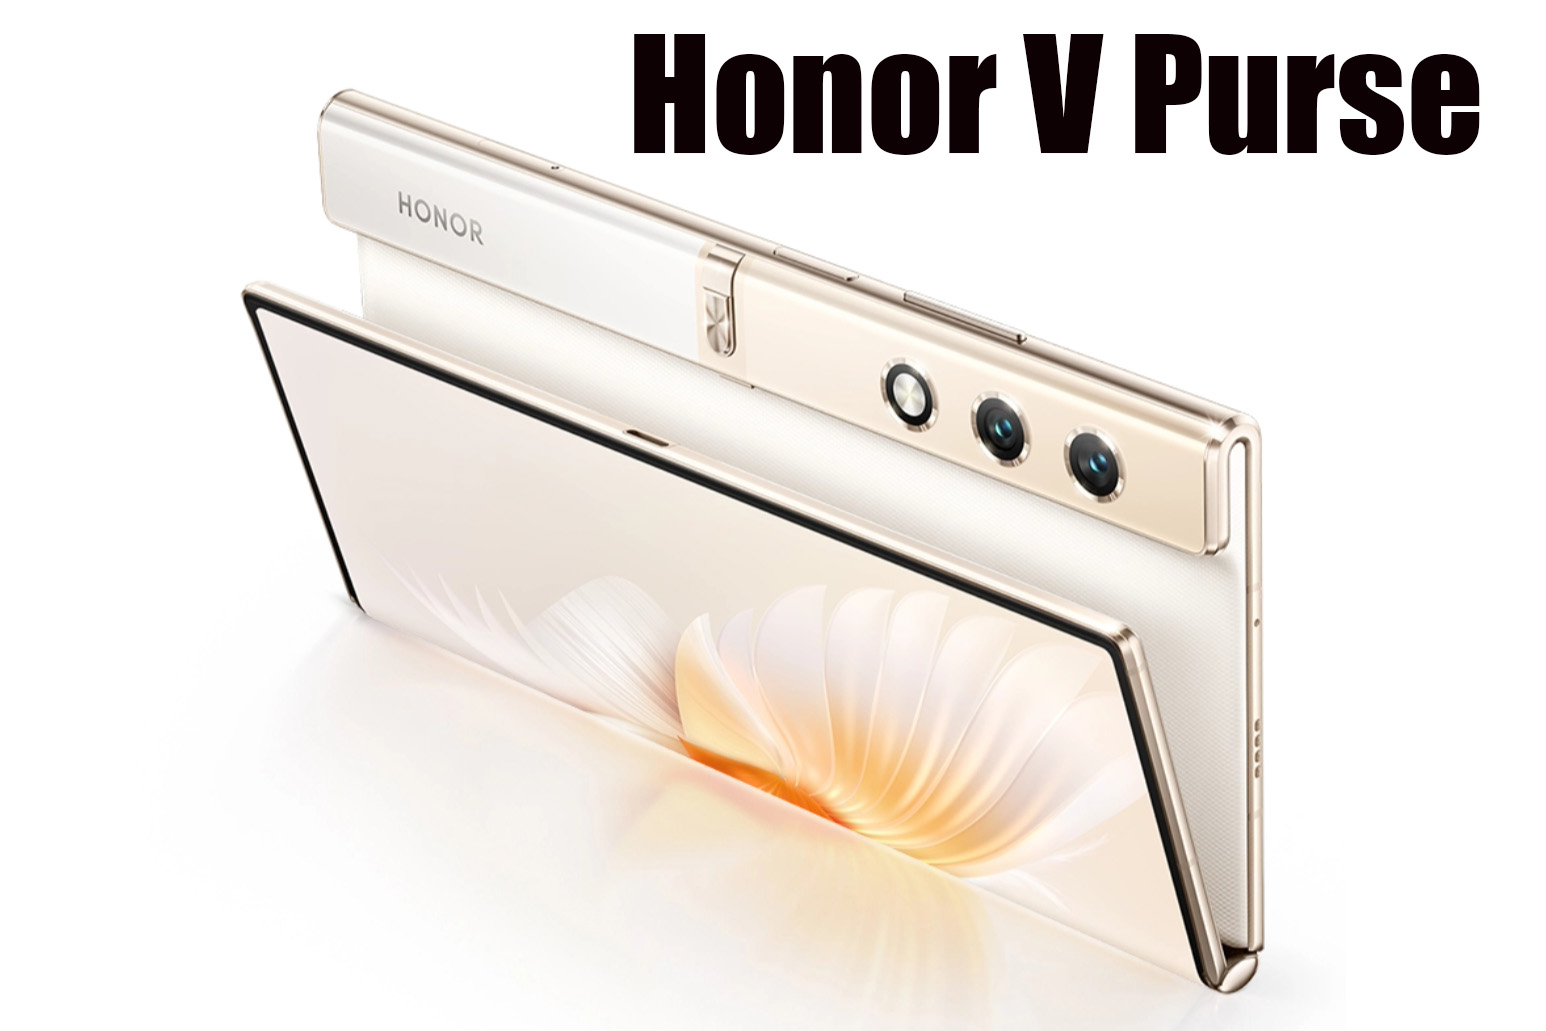 Honor V Purse foldable phone launched in China: price, specs